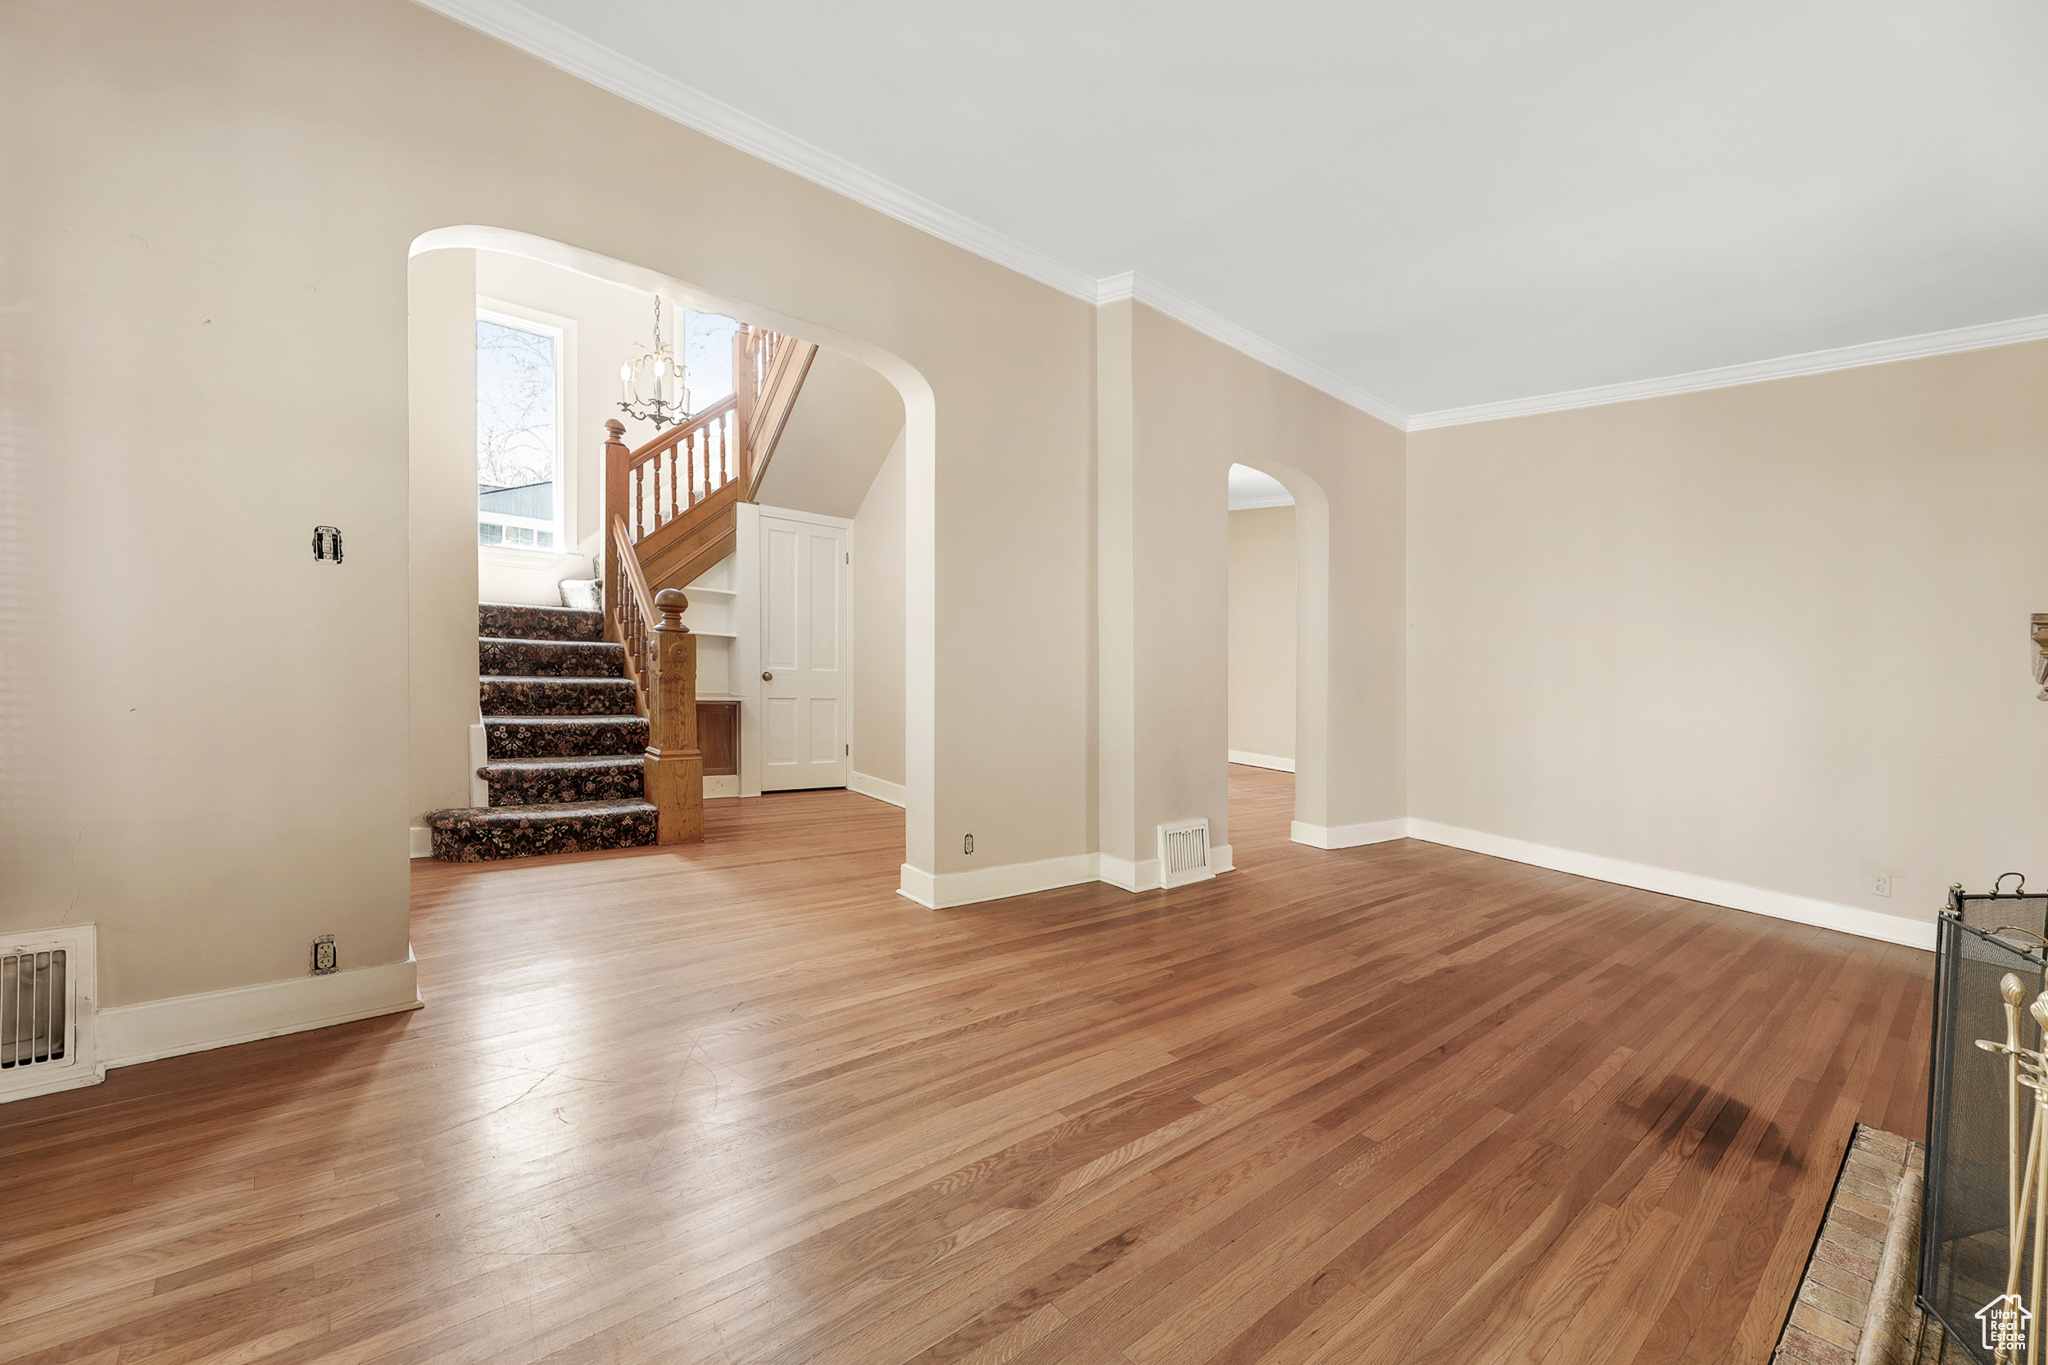 Interior space featuring a notable chandelier, crown molding, and hardwood / wood-style flooring